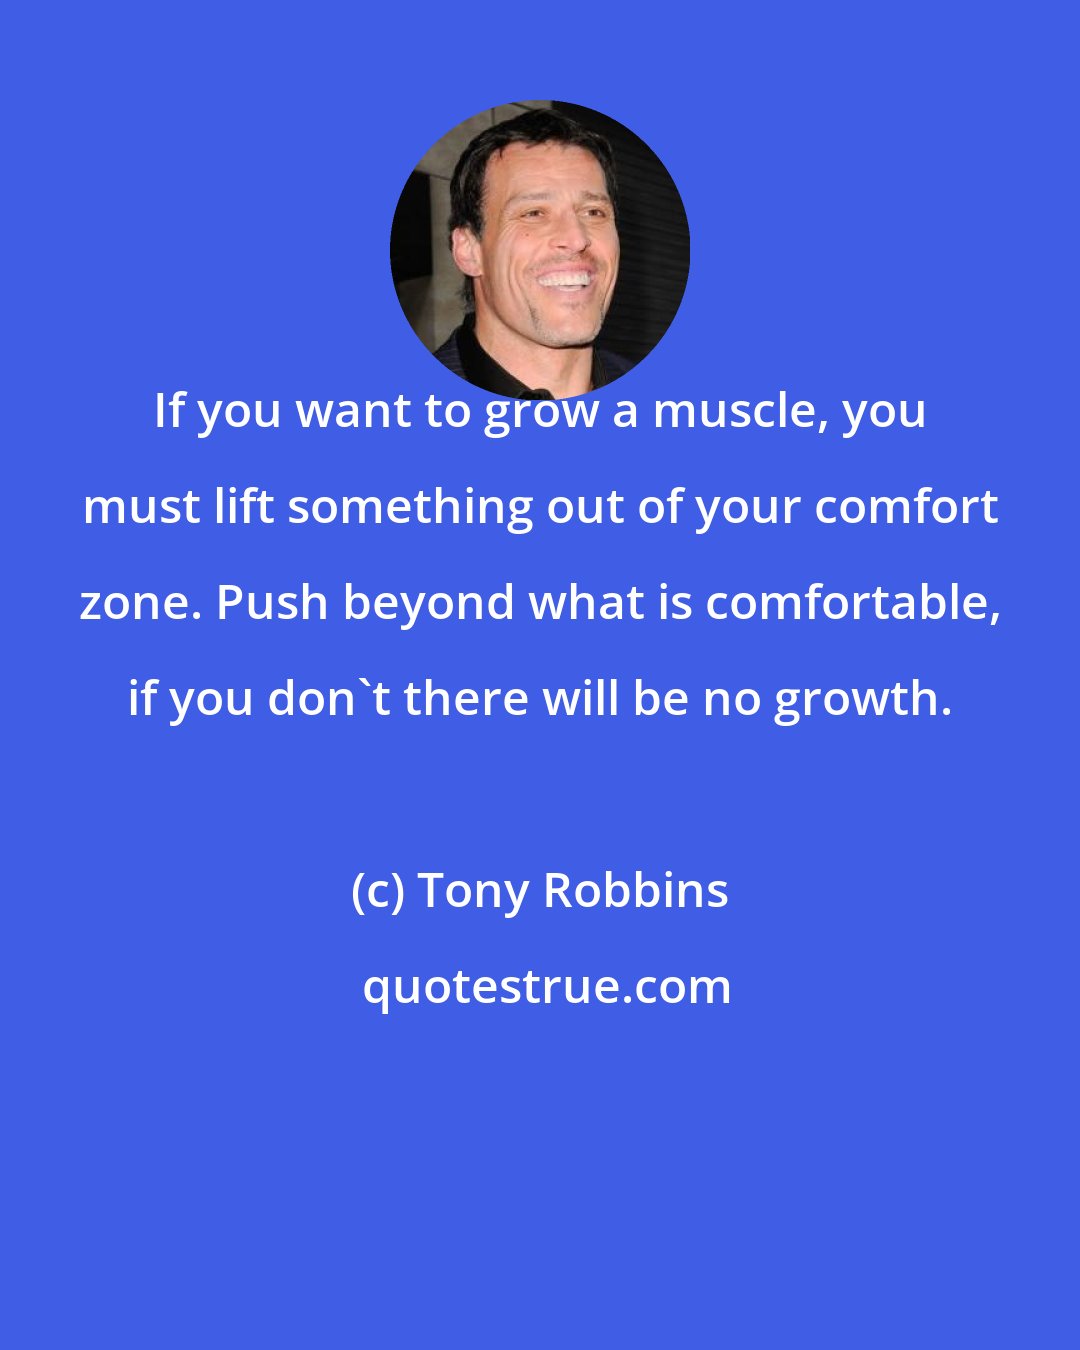 Tony Robbins: If you want to grow a muscle, you must lift something out of your comfort zone. Push beyond what is comfortable, if you don't there will be no growth.